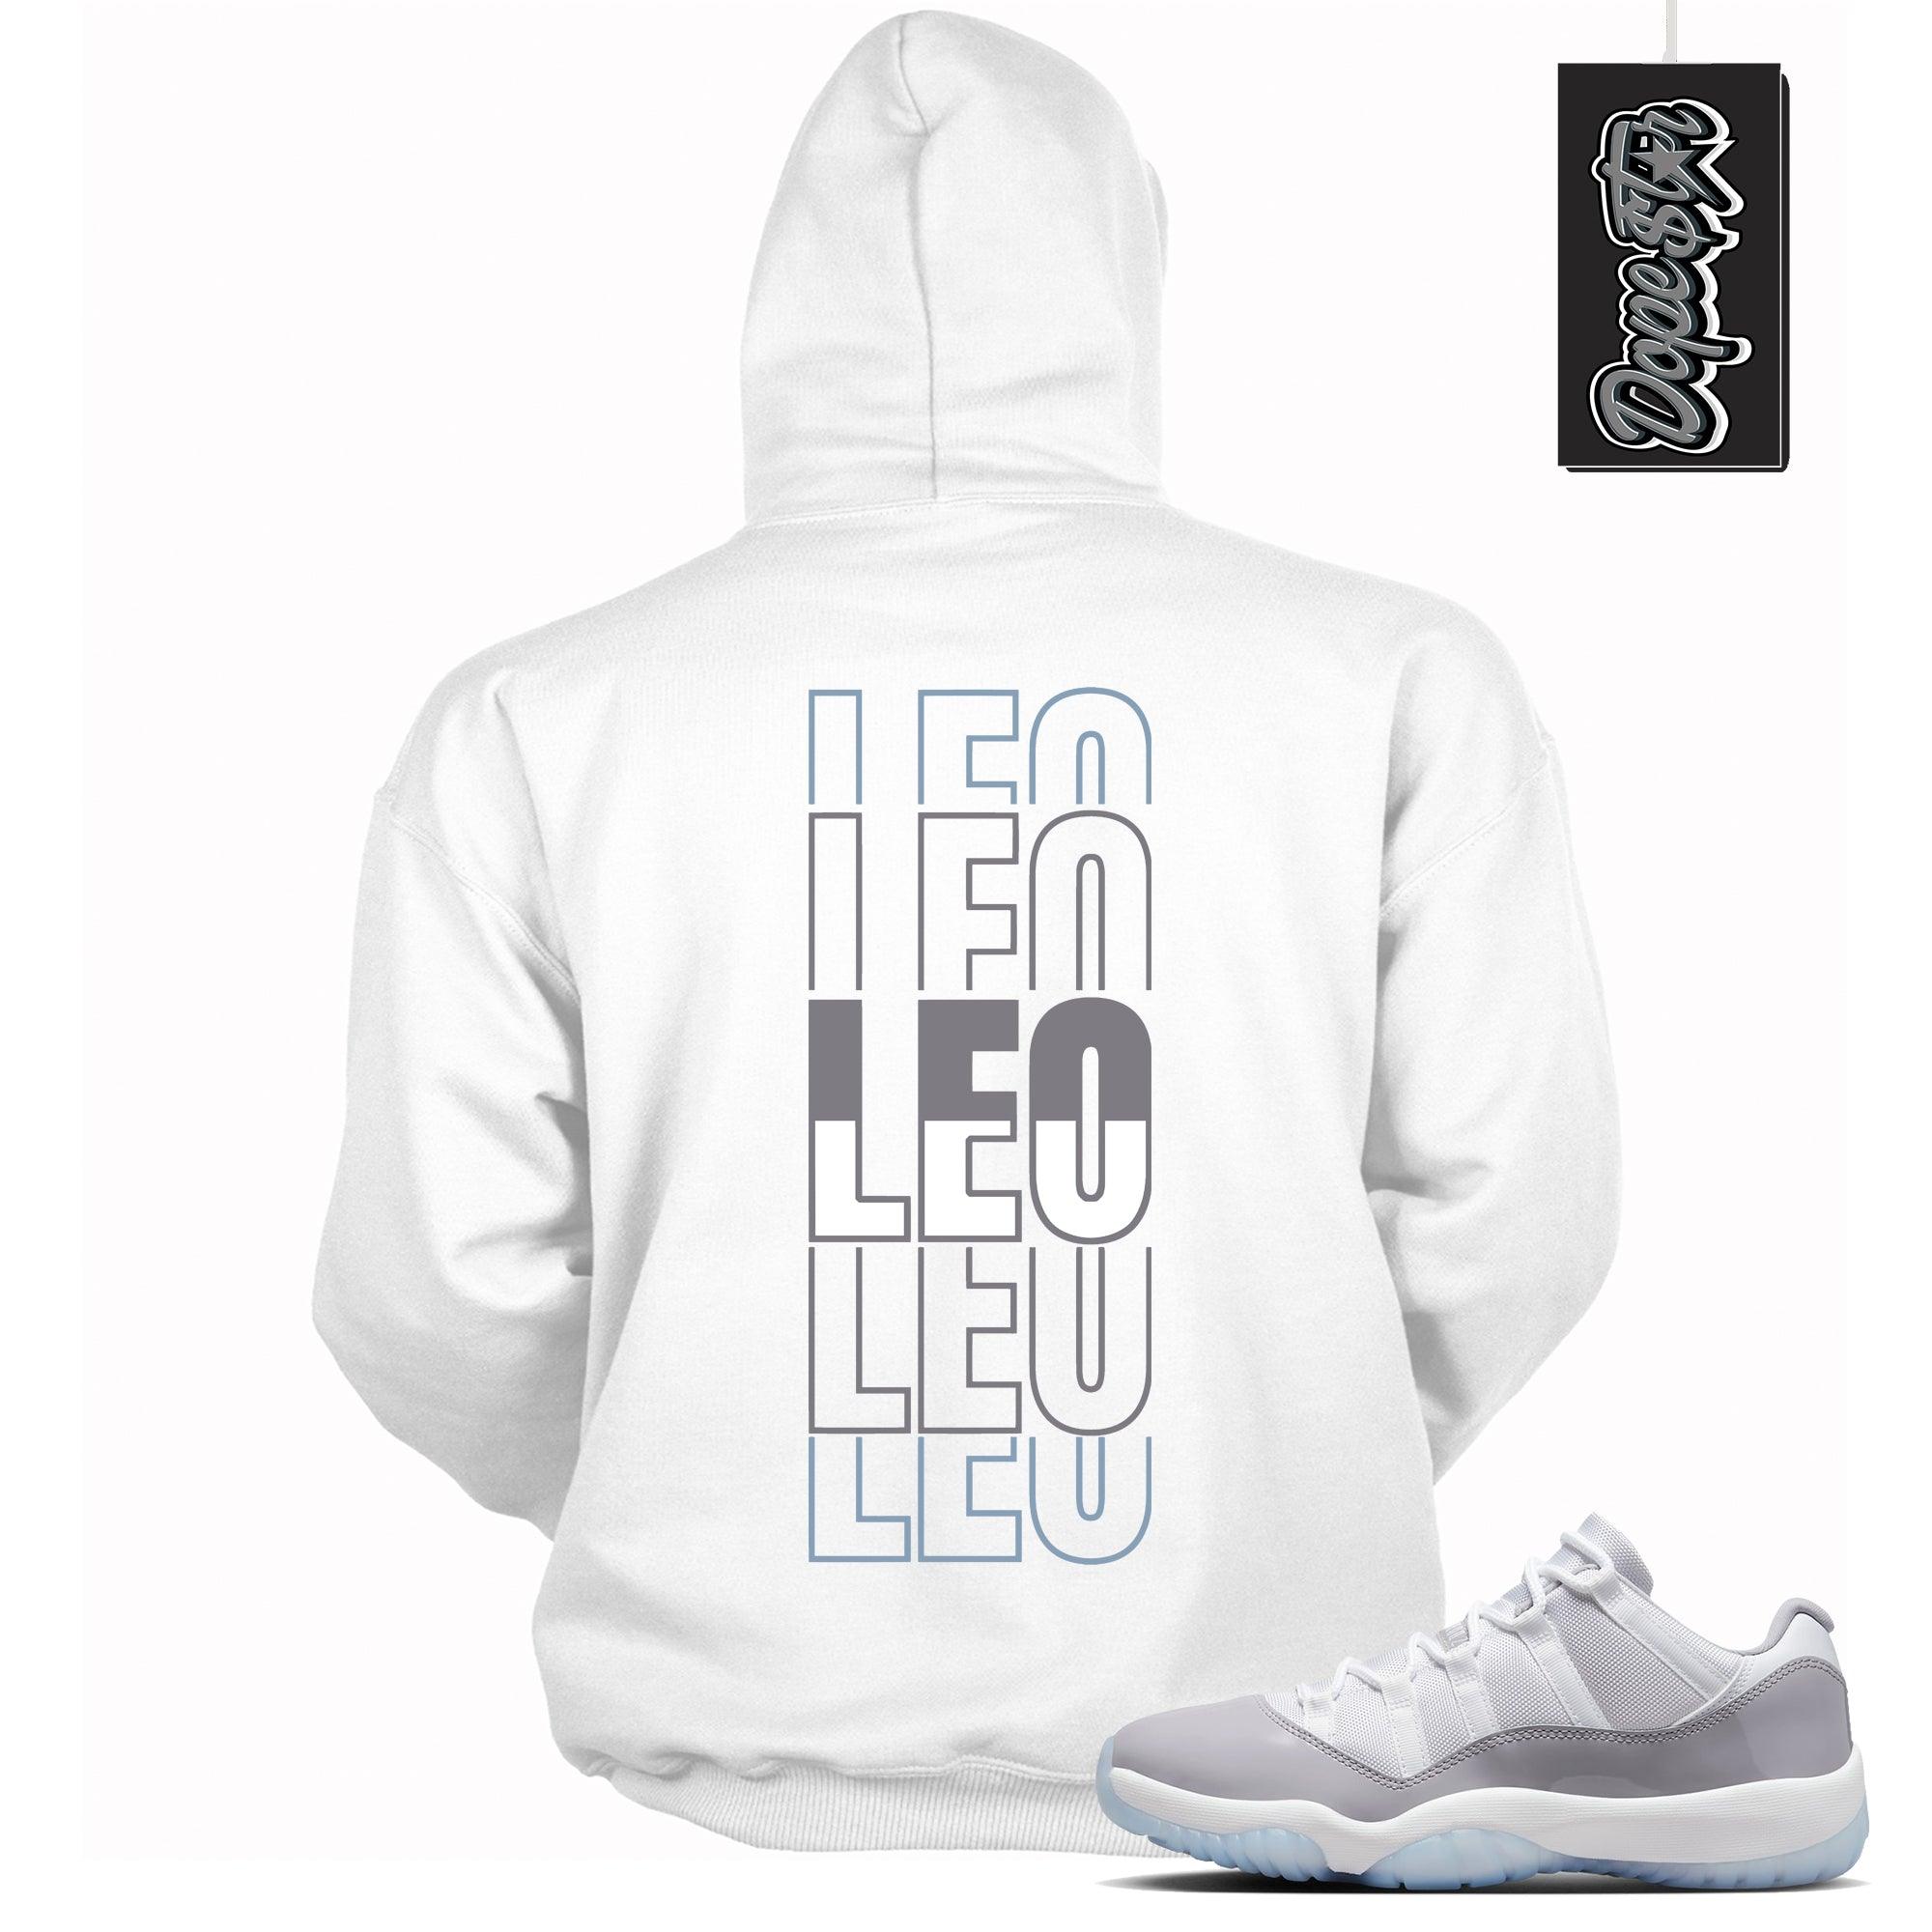 Cool White Graphic Hoodie with “ LEO “ print, that perfectly matches Air Jordan 11 Retro Low Cement Grey sneakers